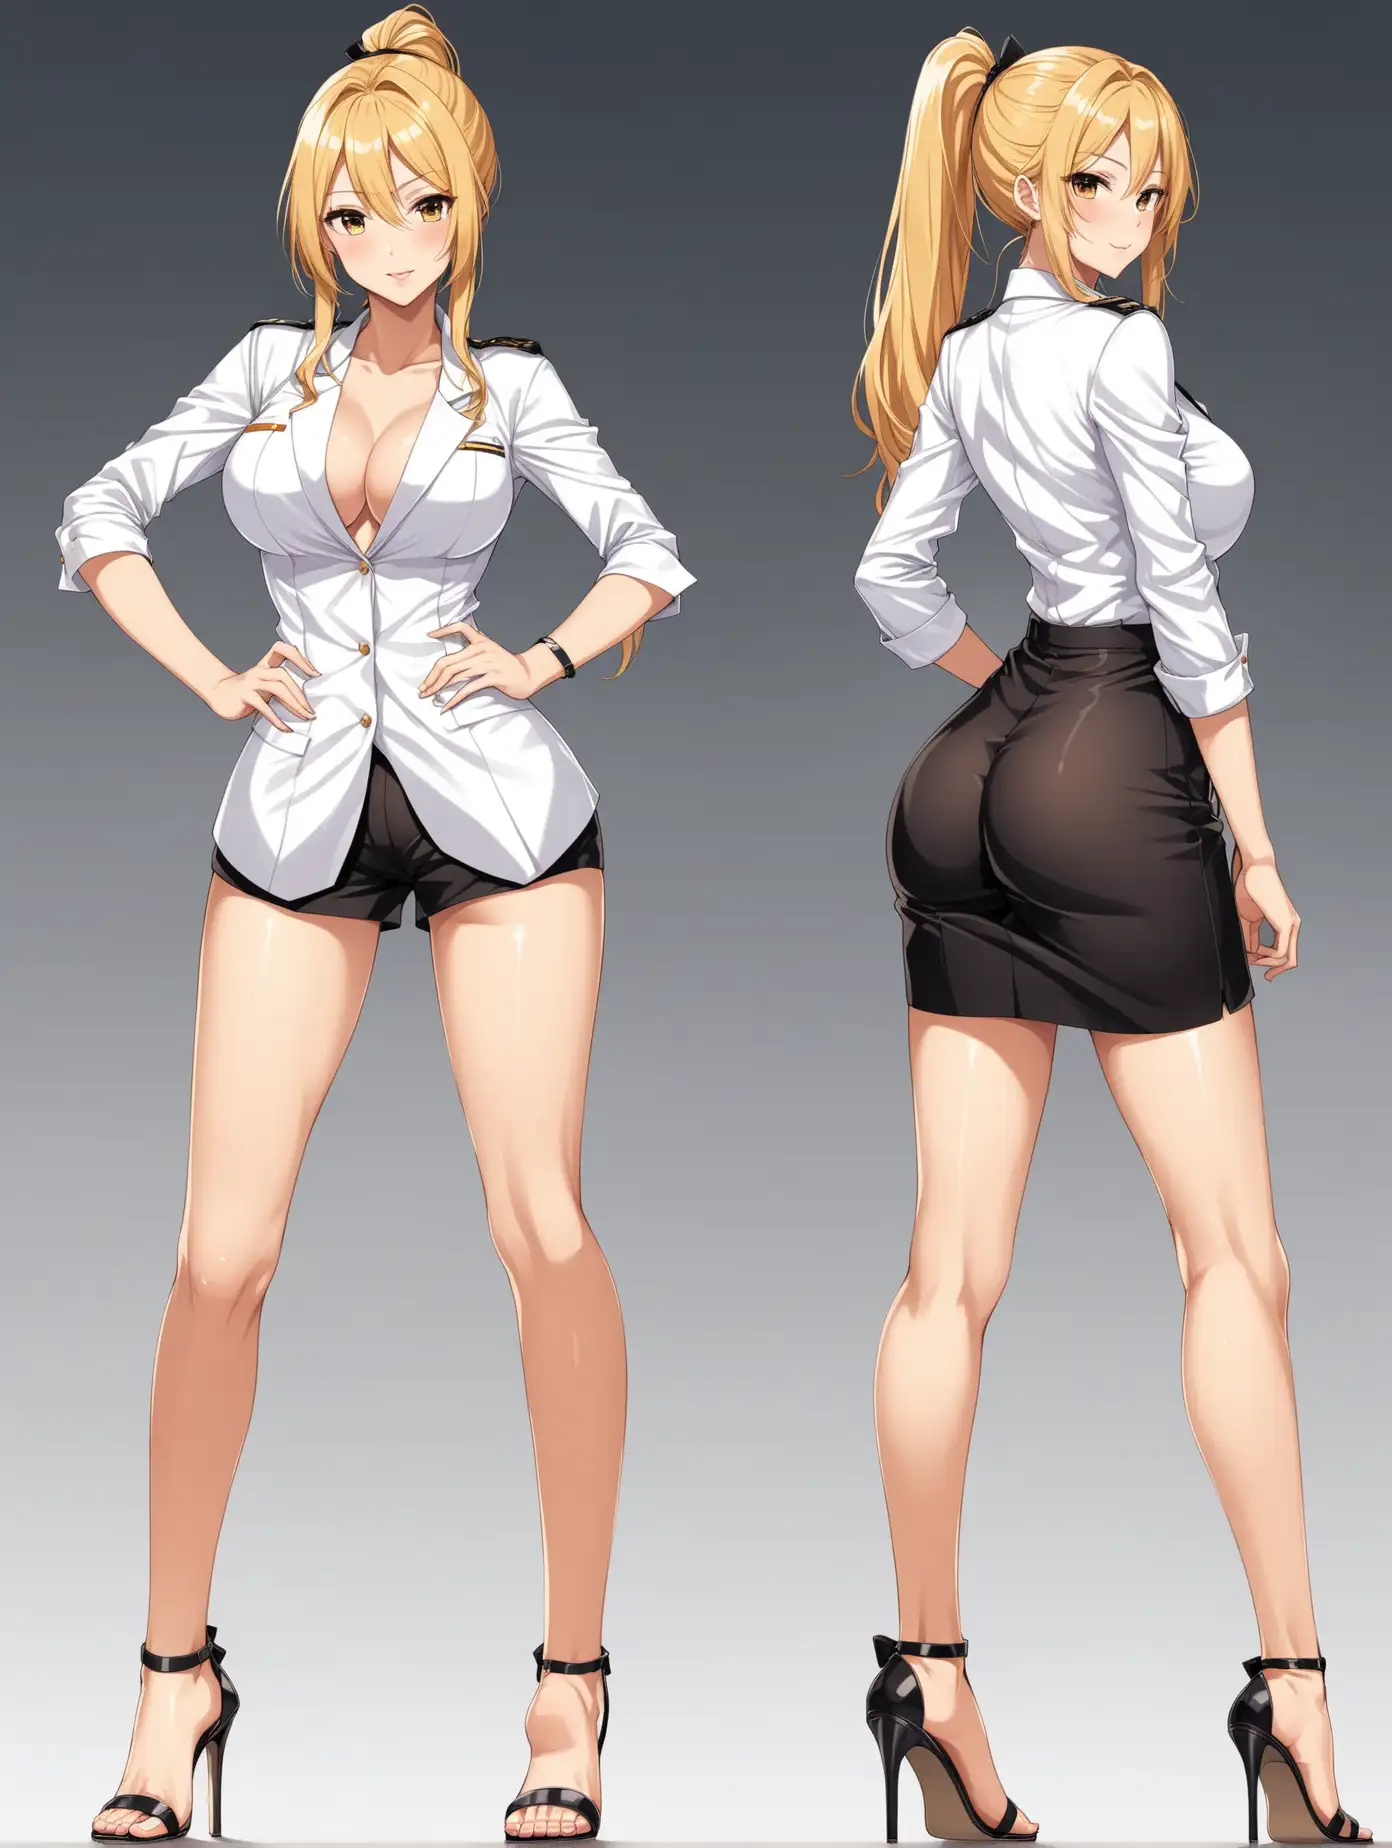 Sultry-Director-Anime-Girl-in-Blonde-Hair-and-High-Heels